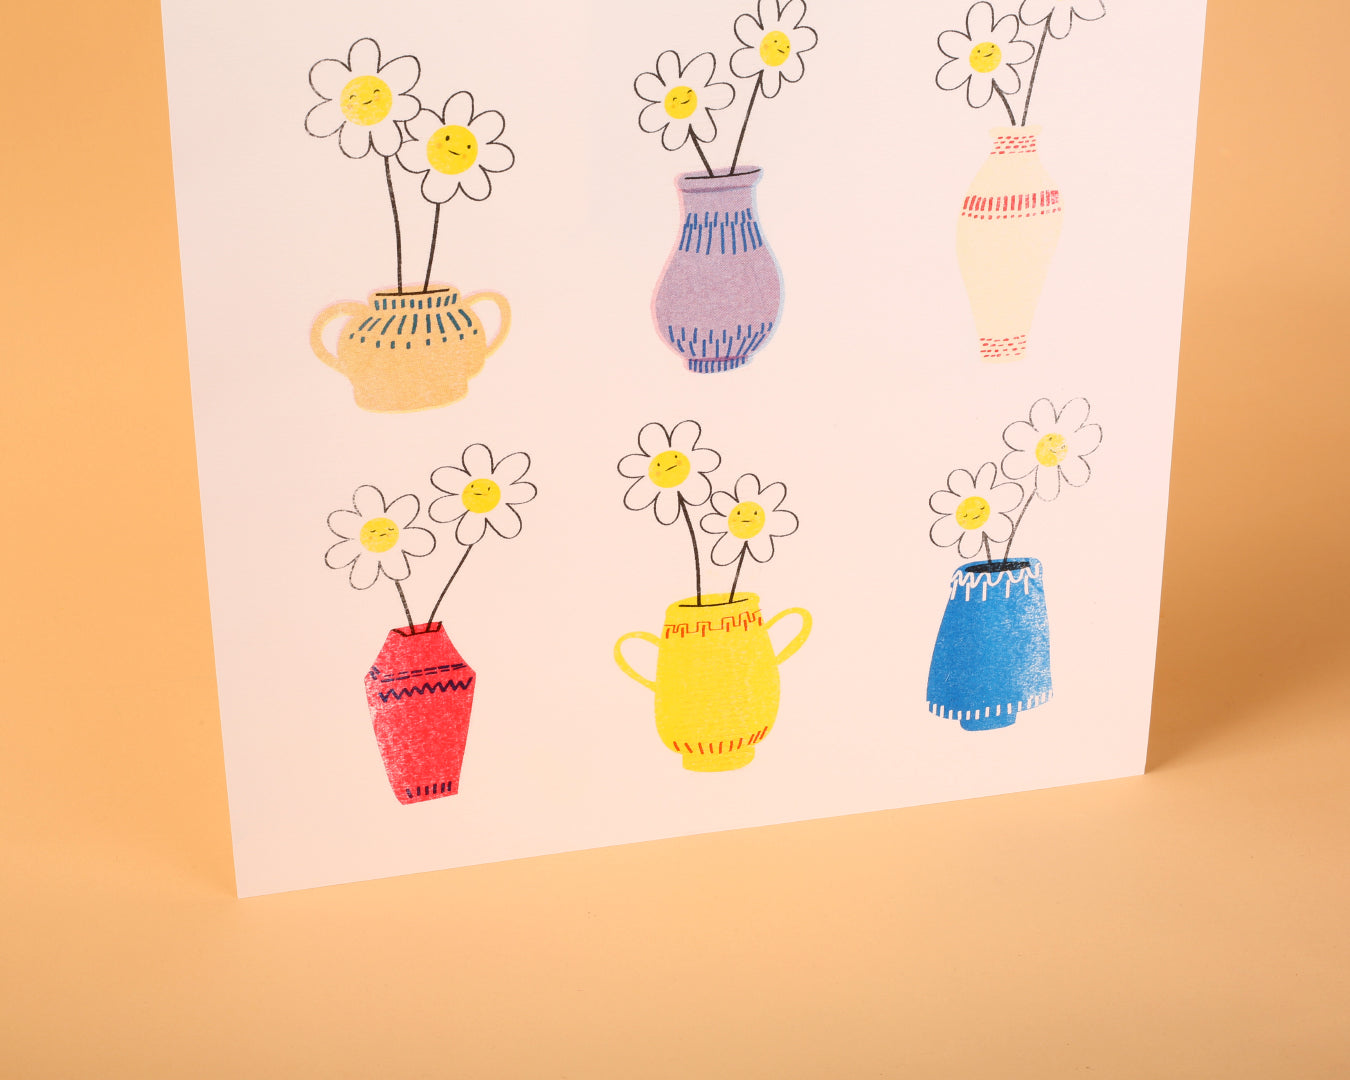 Cat Rabbit - Daisies in Vases Limited Ed. Risograph